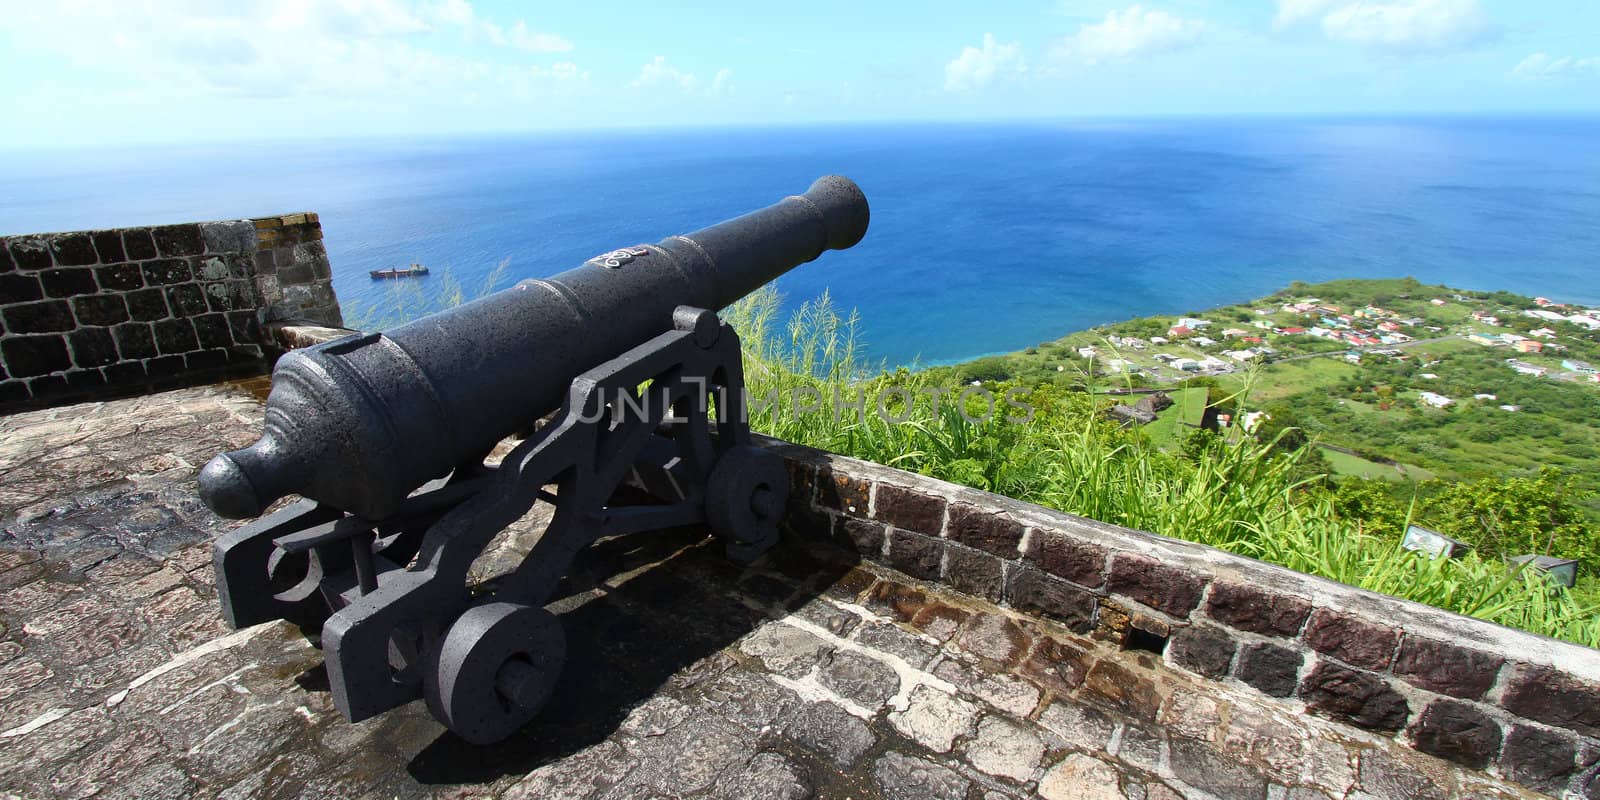 Cannon at Brimstone Hill Fortress National Park on Saint Kitts.